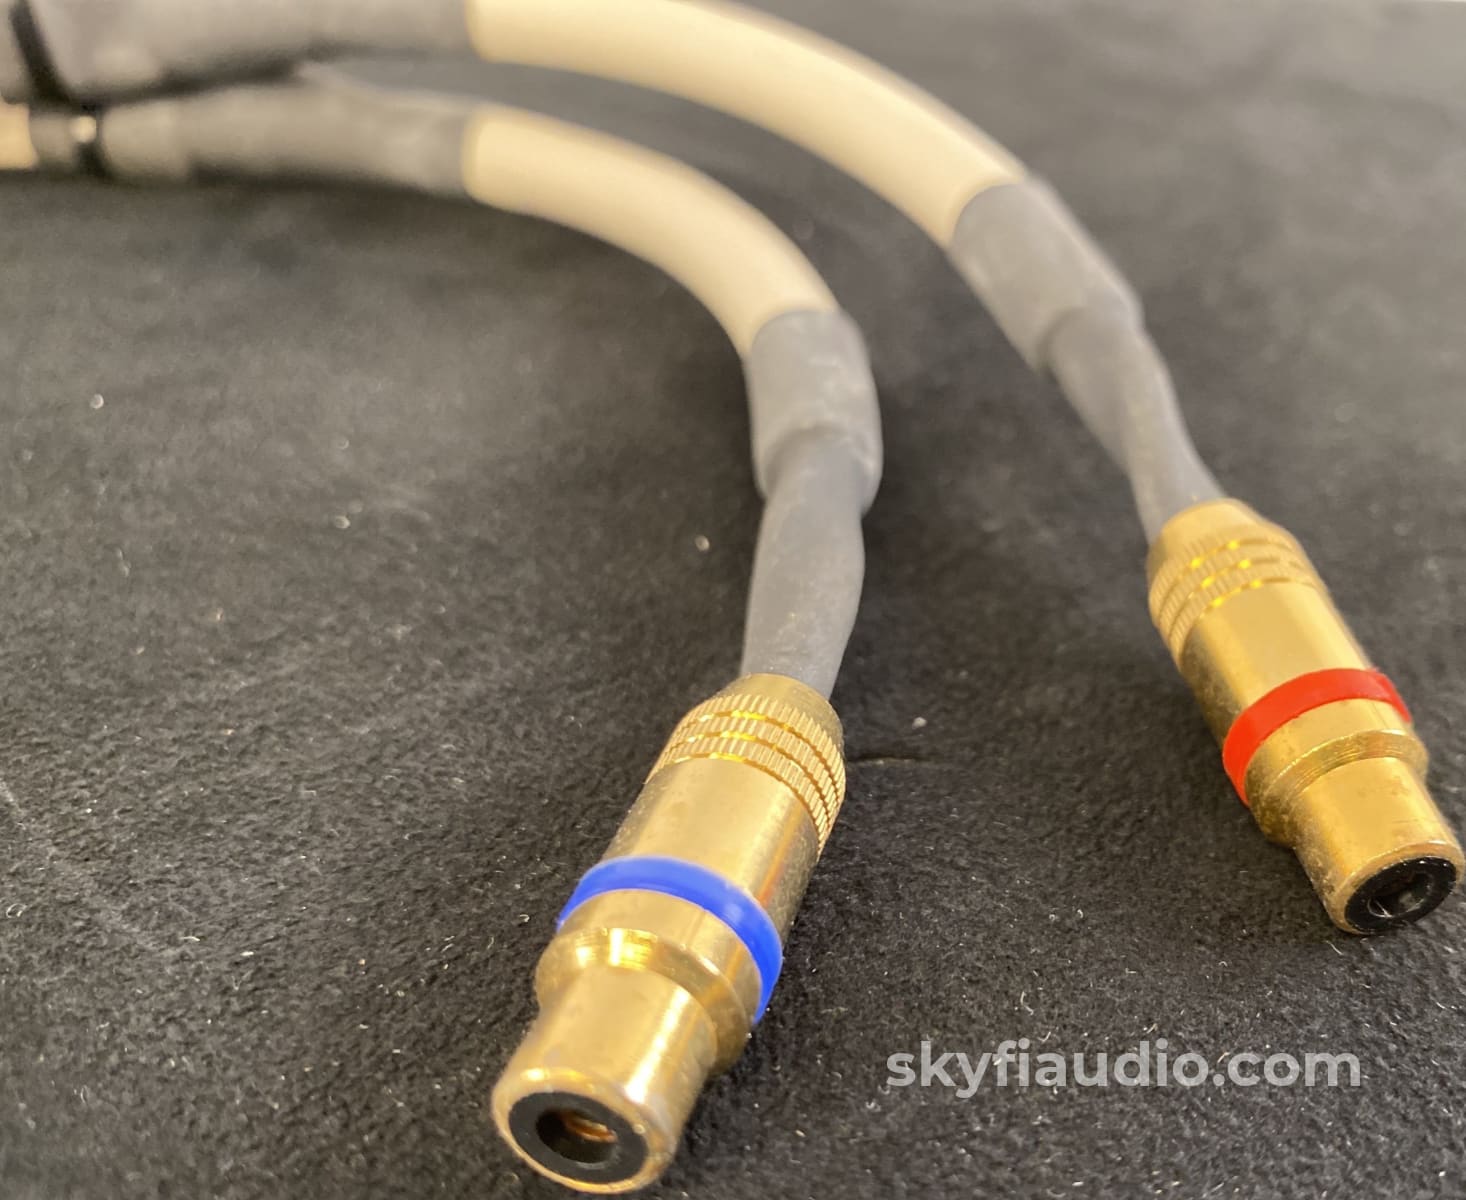 Transparent Audio - Rare Y-Splitter Rca Cables New Old Stock (Nos)!